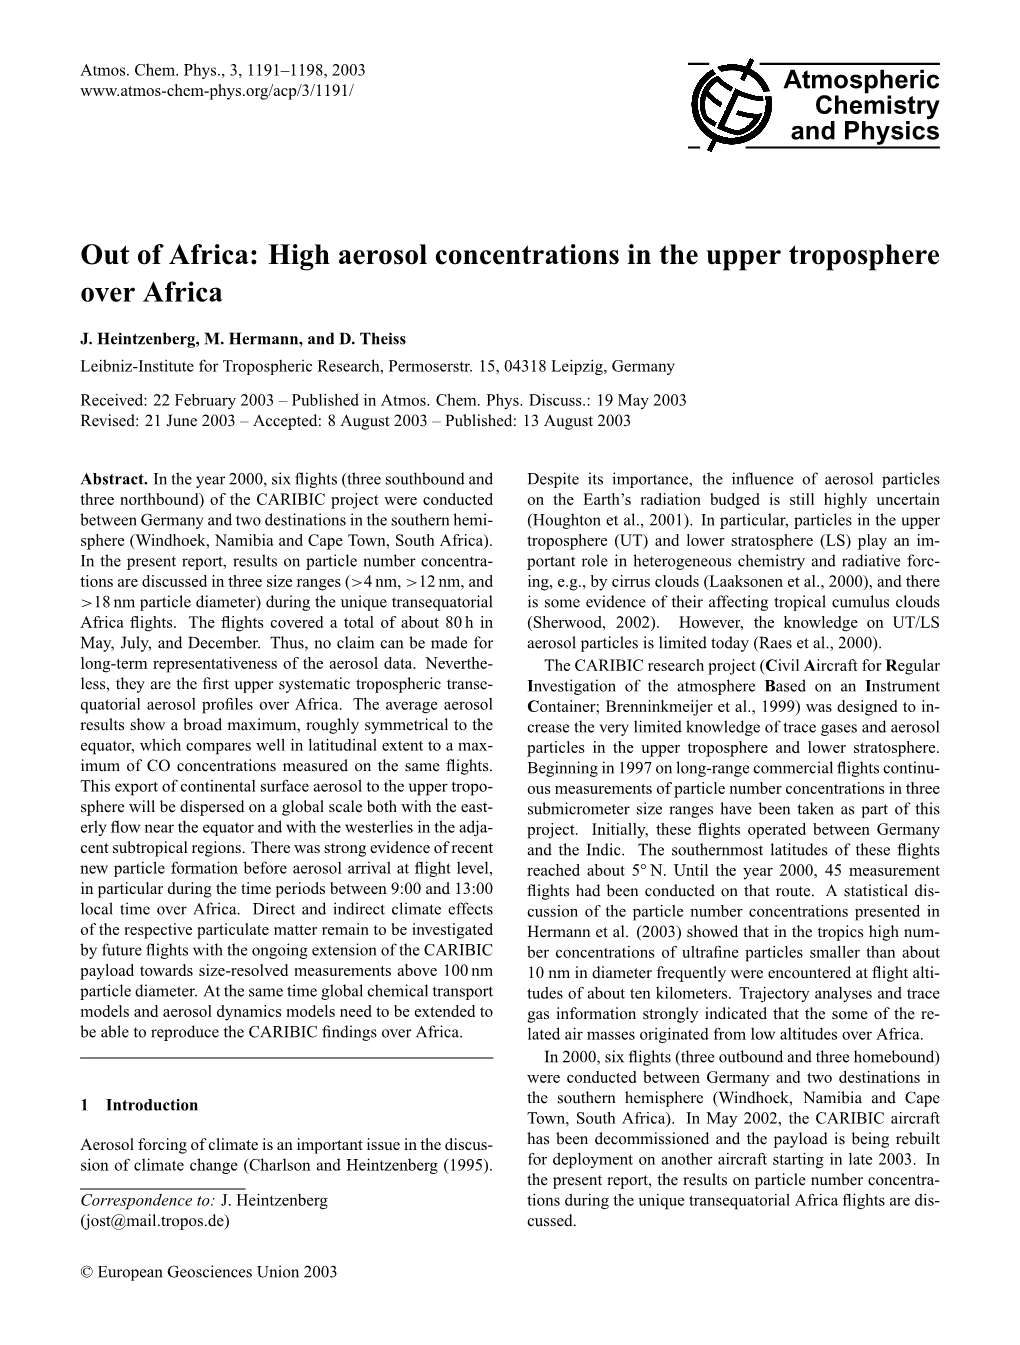 High Aerosol Concentrations in the Upper Troposphere Over Africa